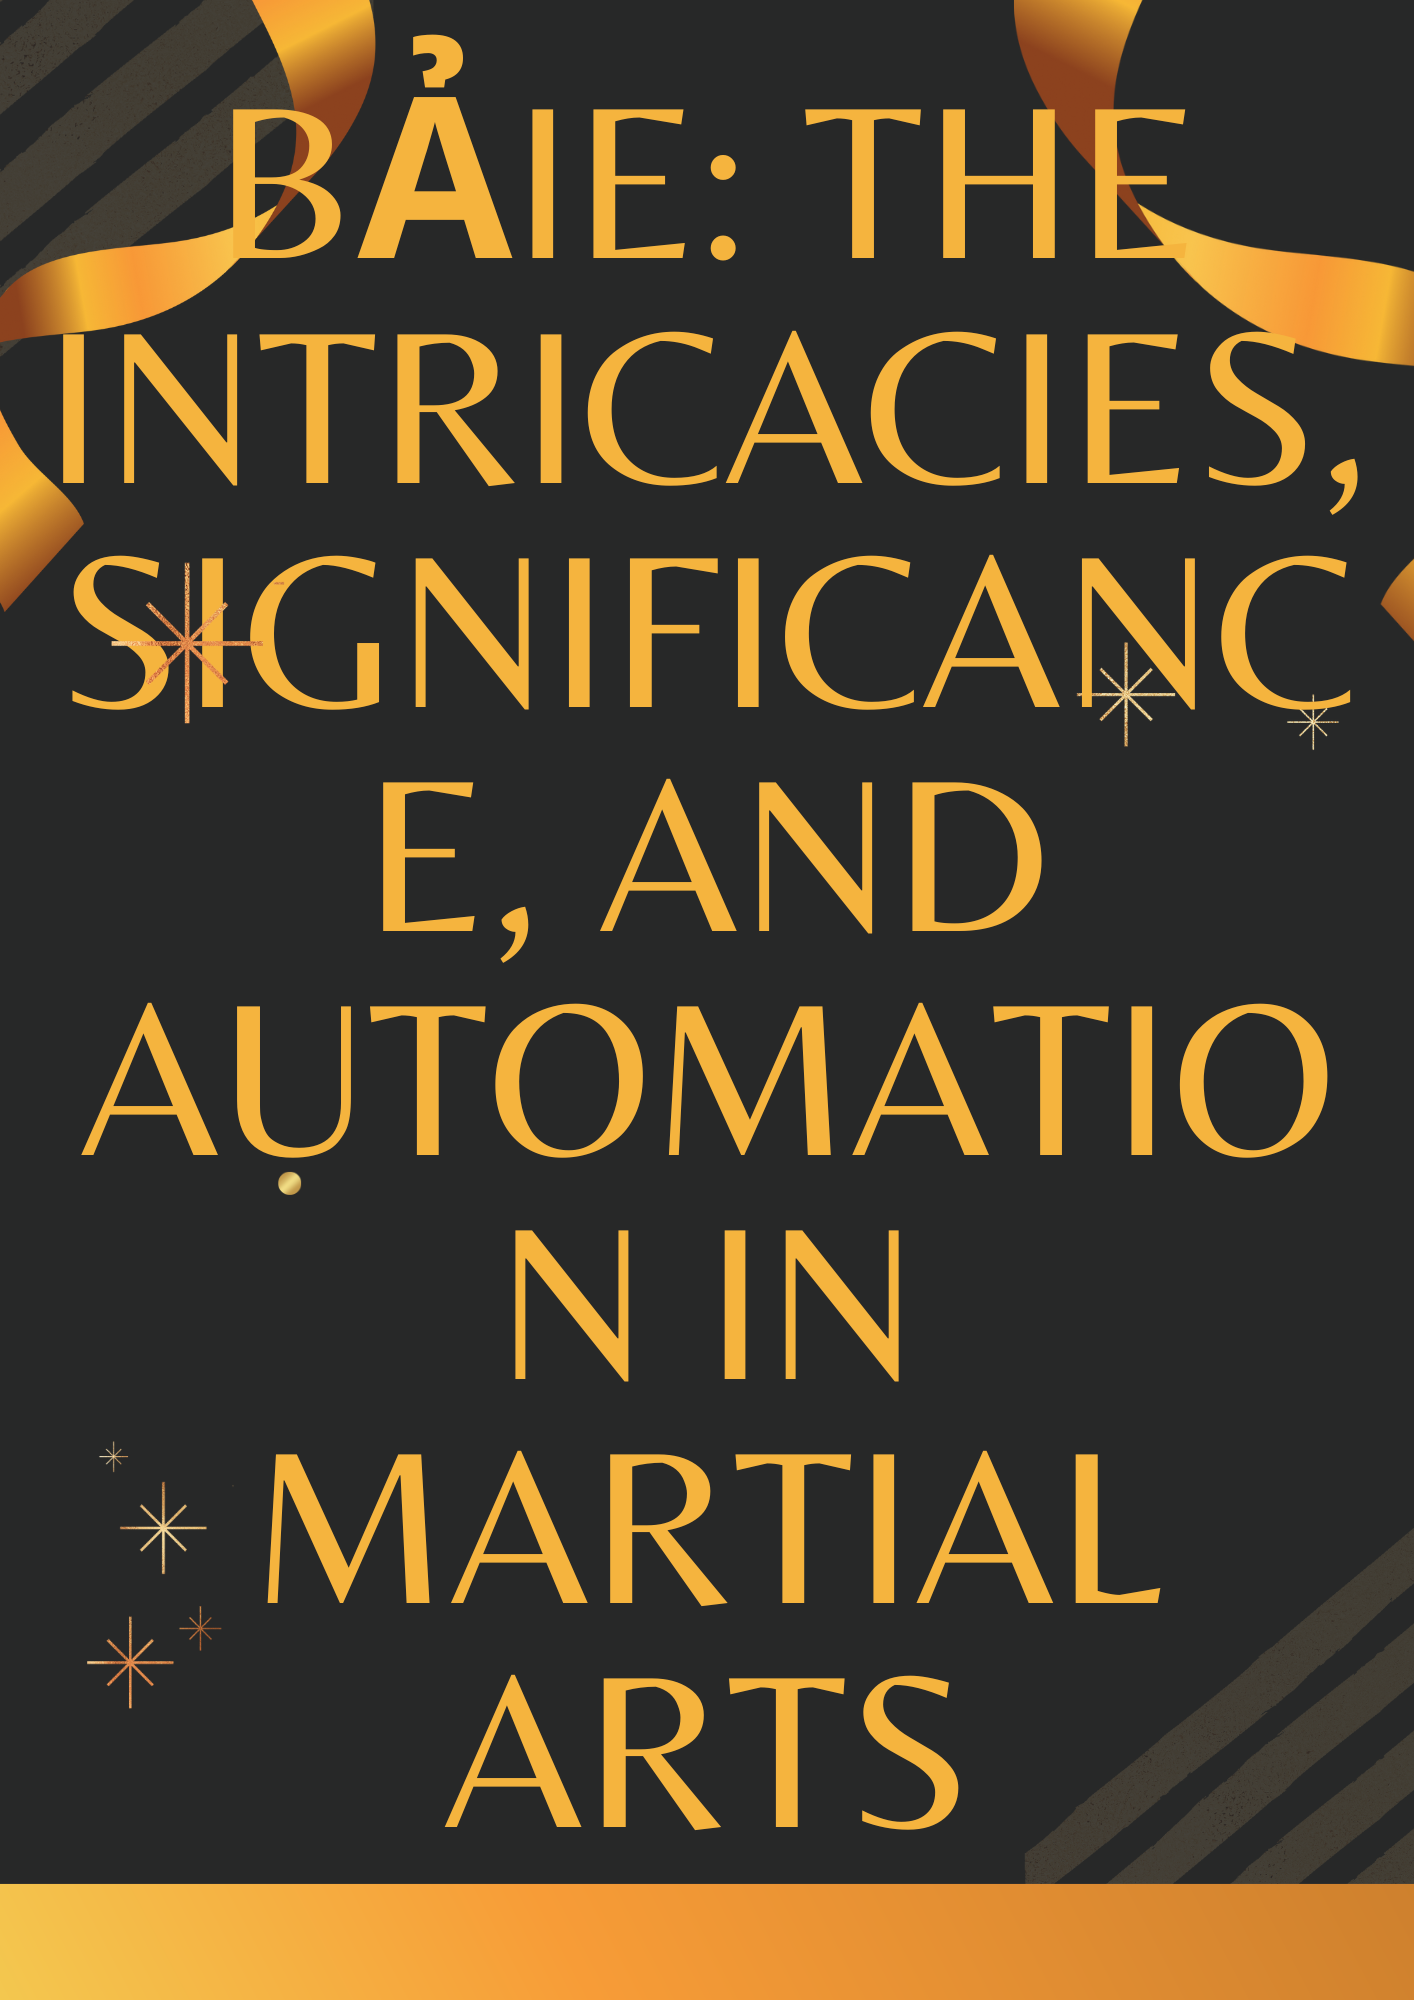 Bảie: The Intricacies, Significance, and Automation in Martial Arts